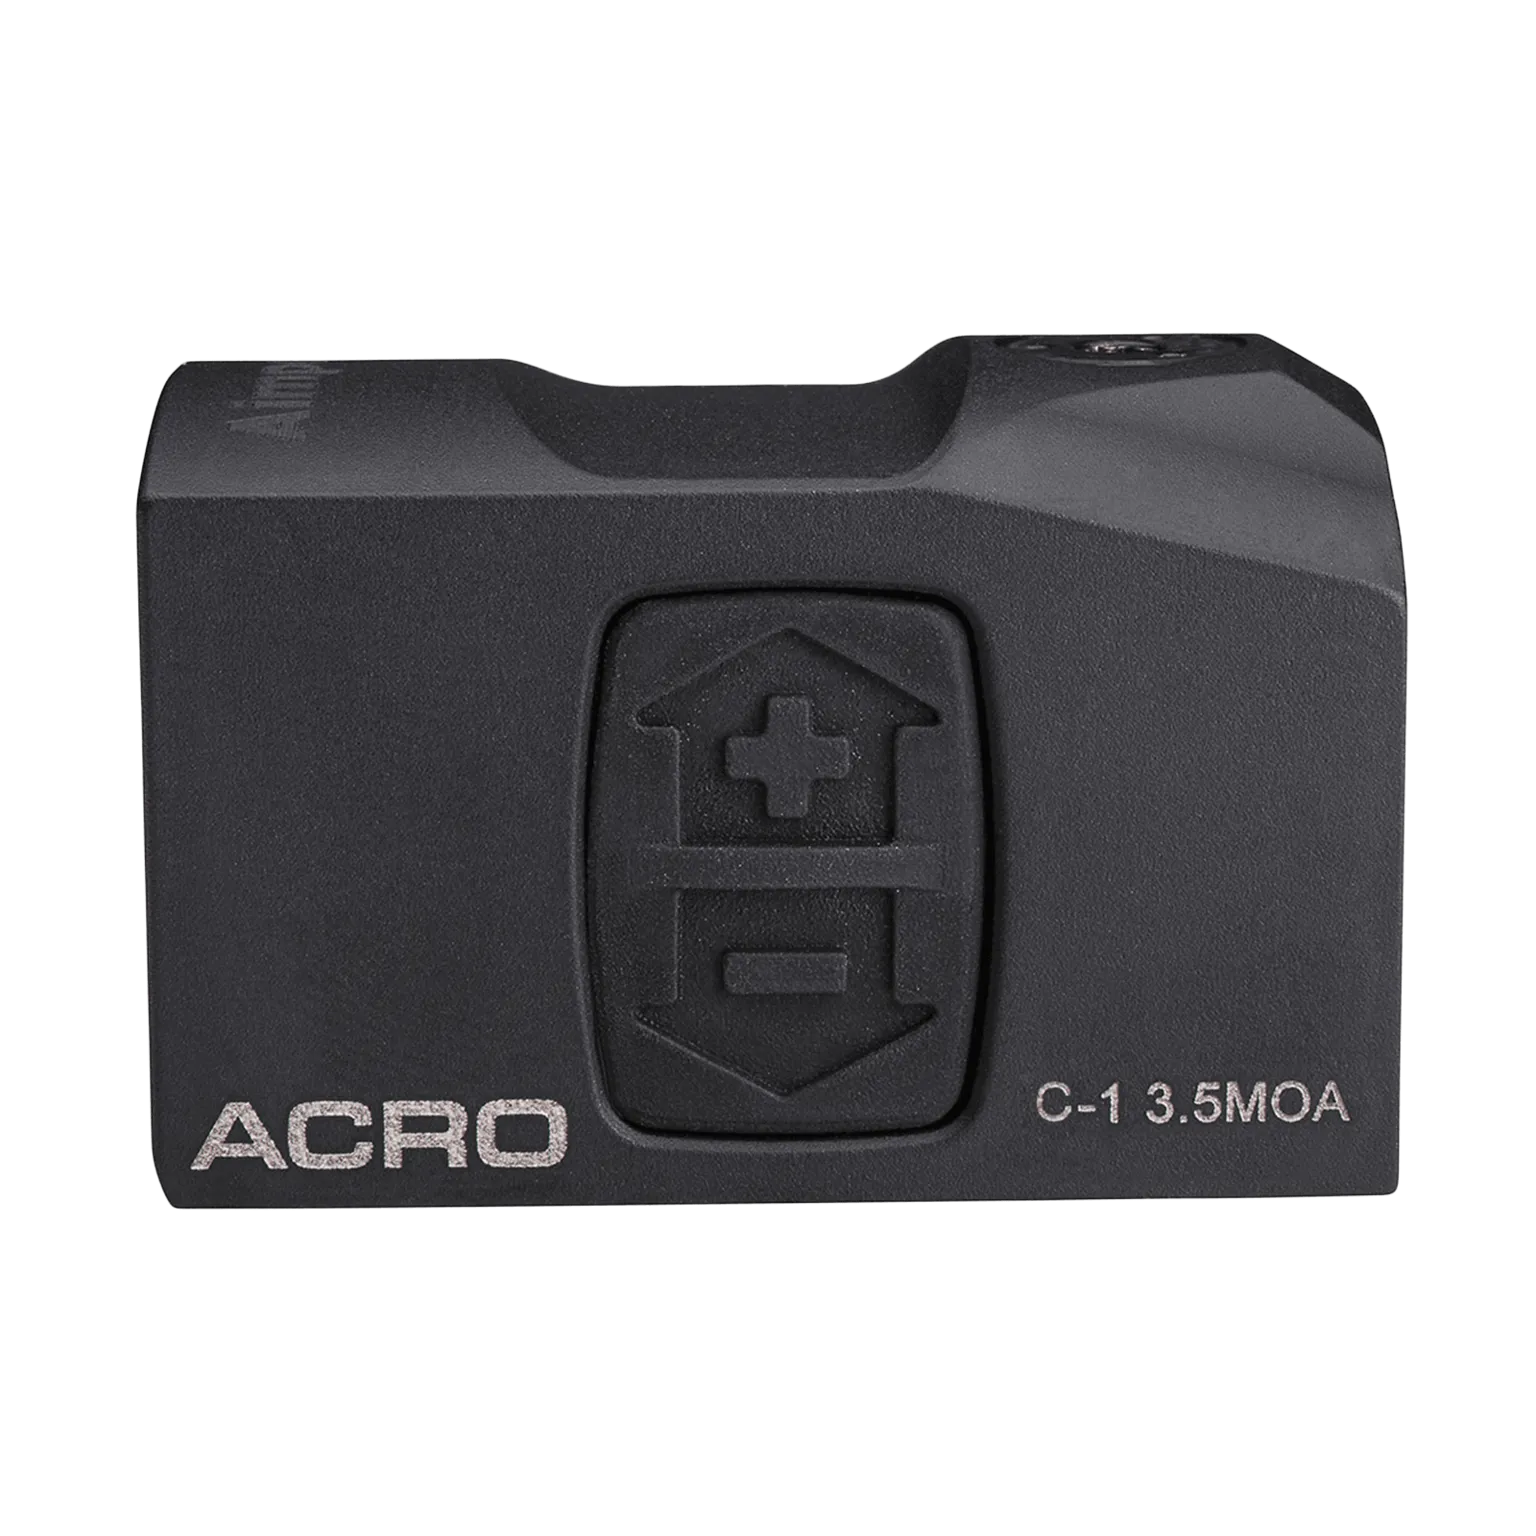 Acro C-1™ 3.5 MOA - Red dot reflex sight with integrated Acro™ interface - 2